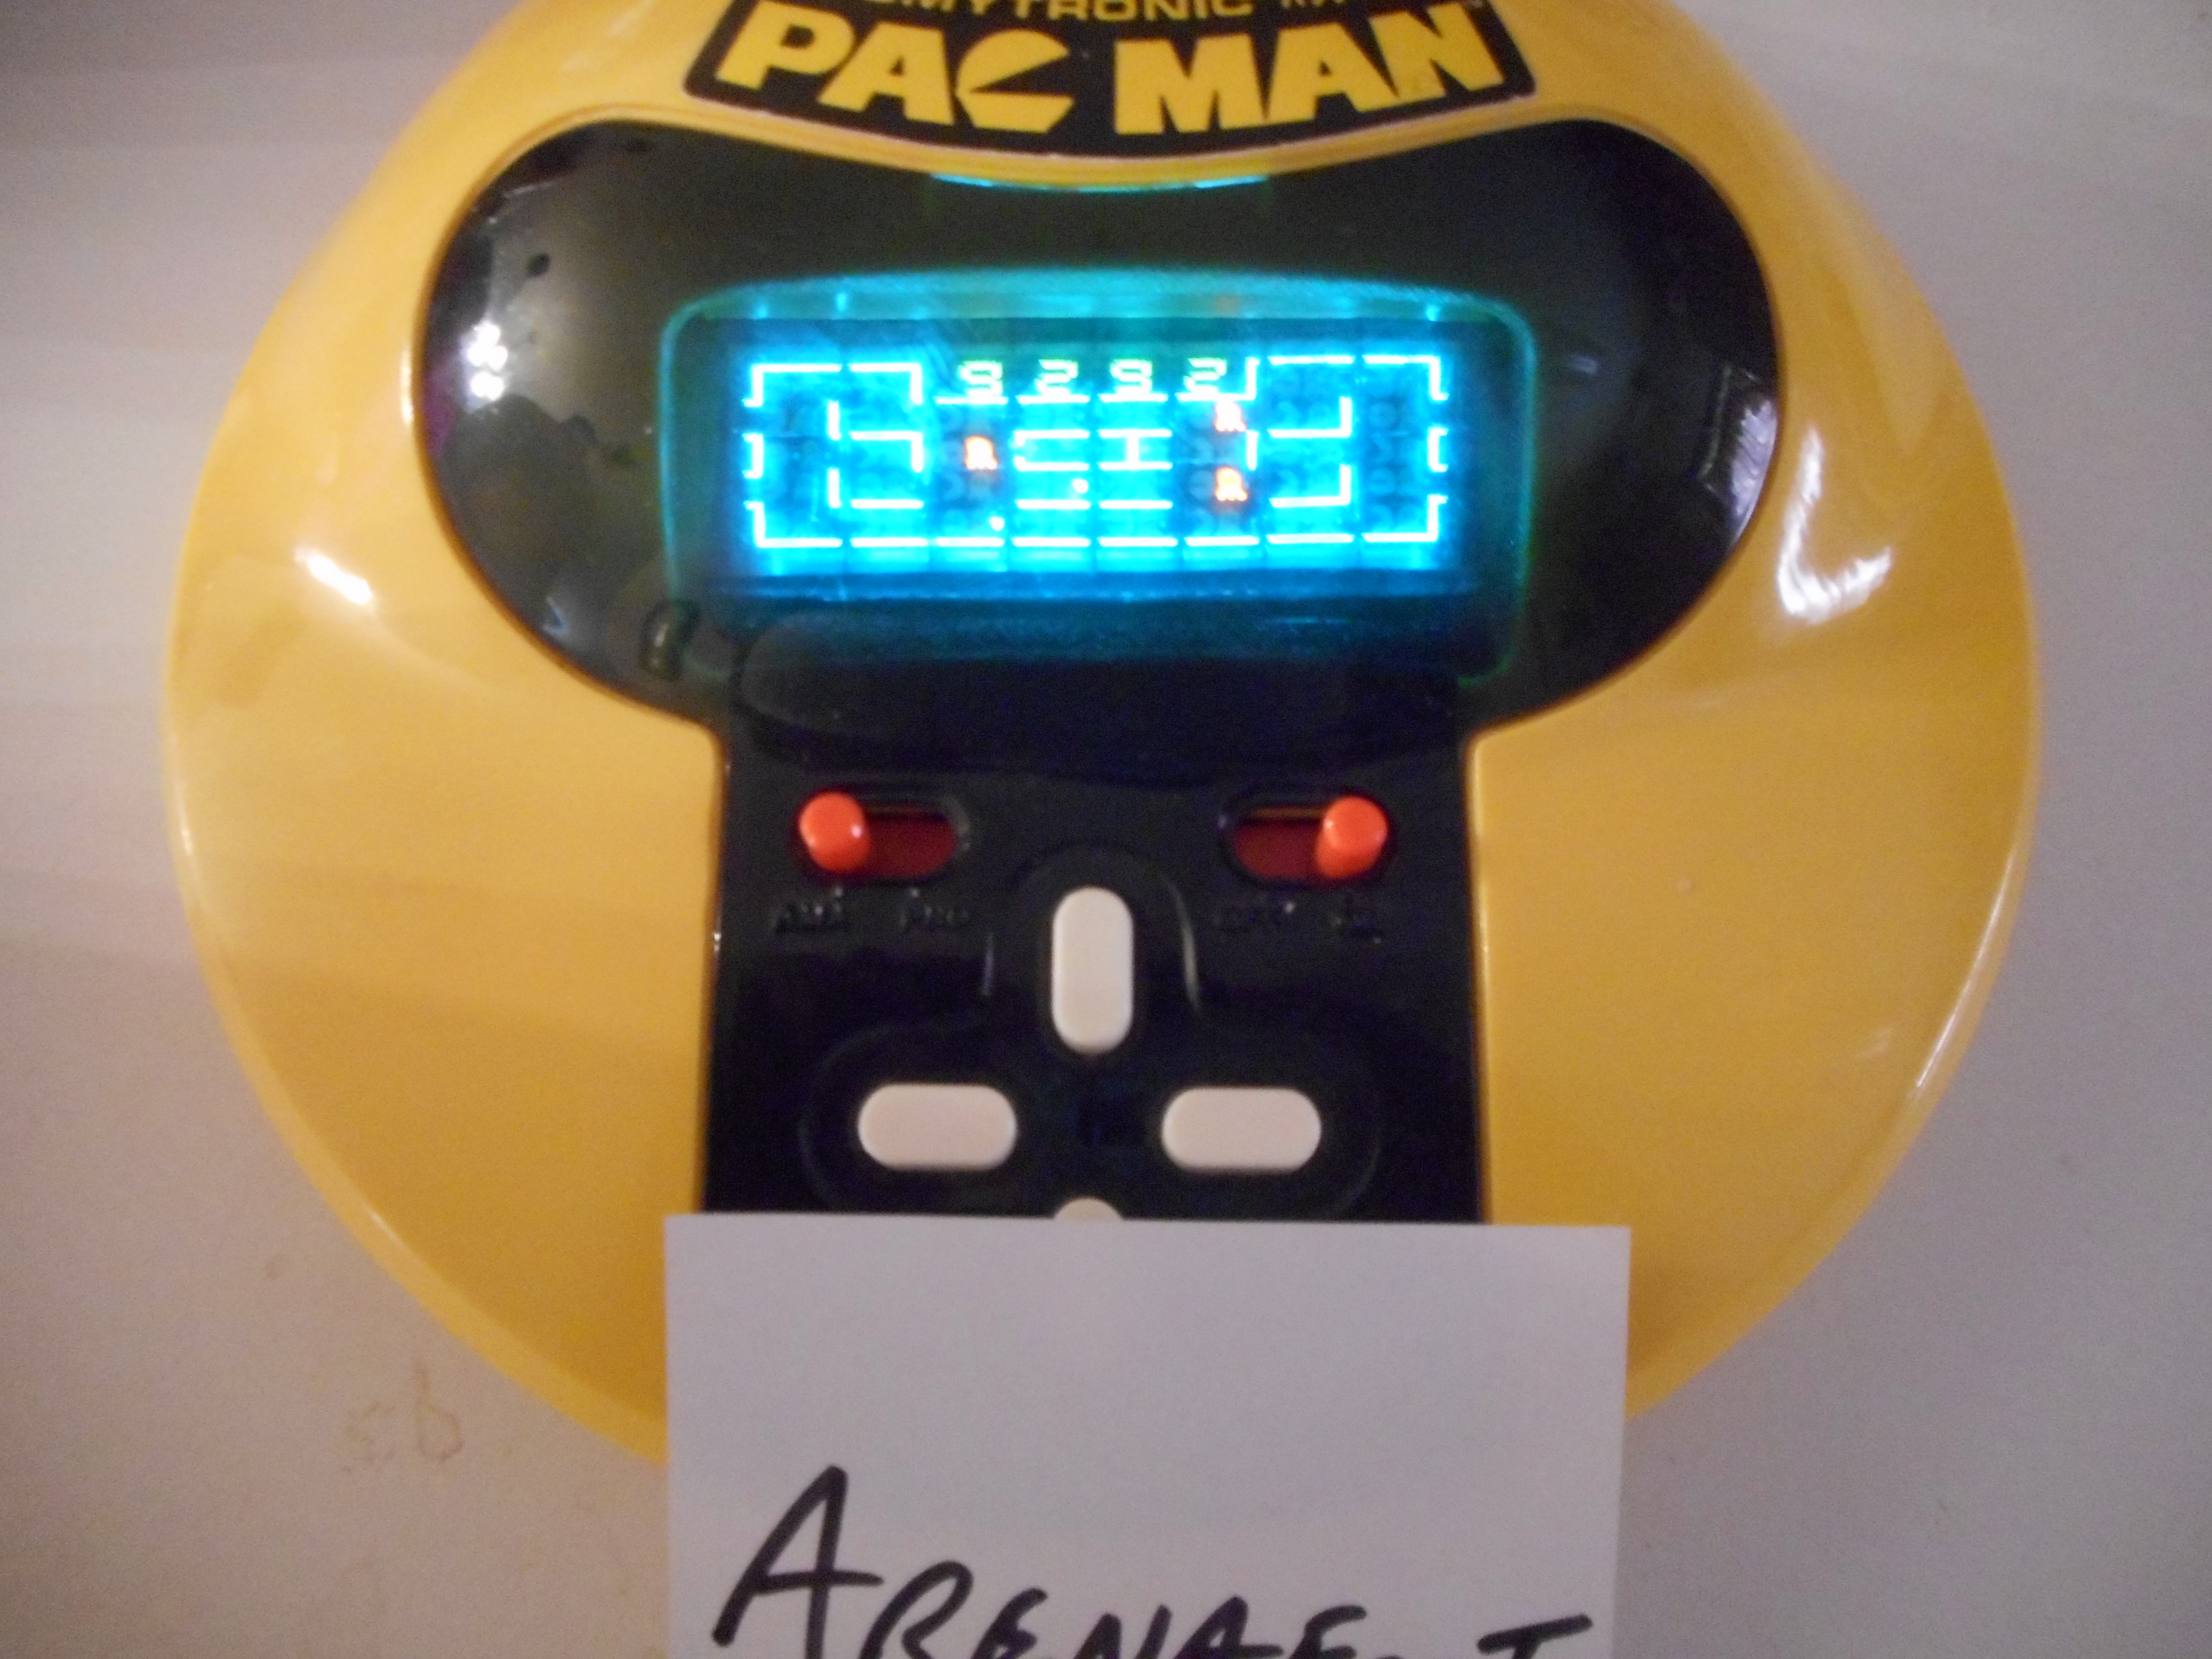 arenafoot: TomyTronic Pac-Man (Dedicated Handheld) 9,292 points on 2017-10-06 10:57:47